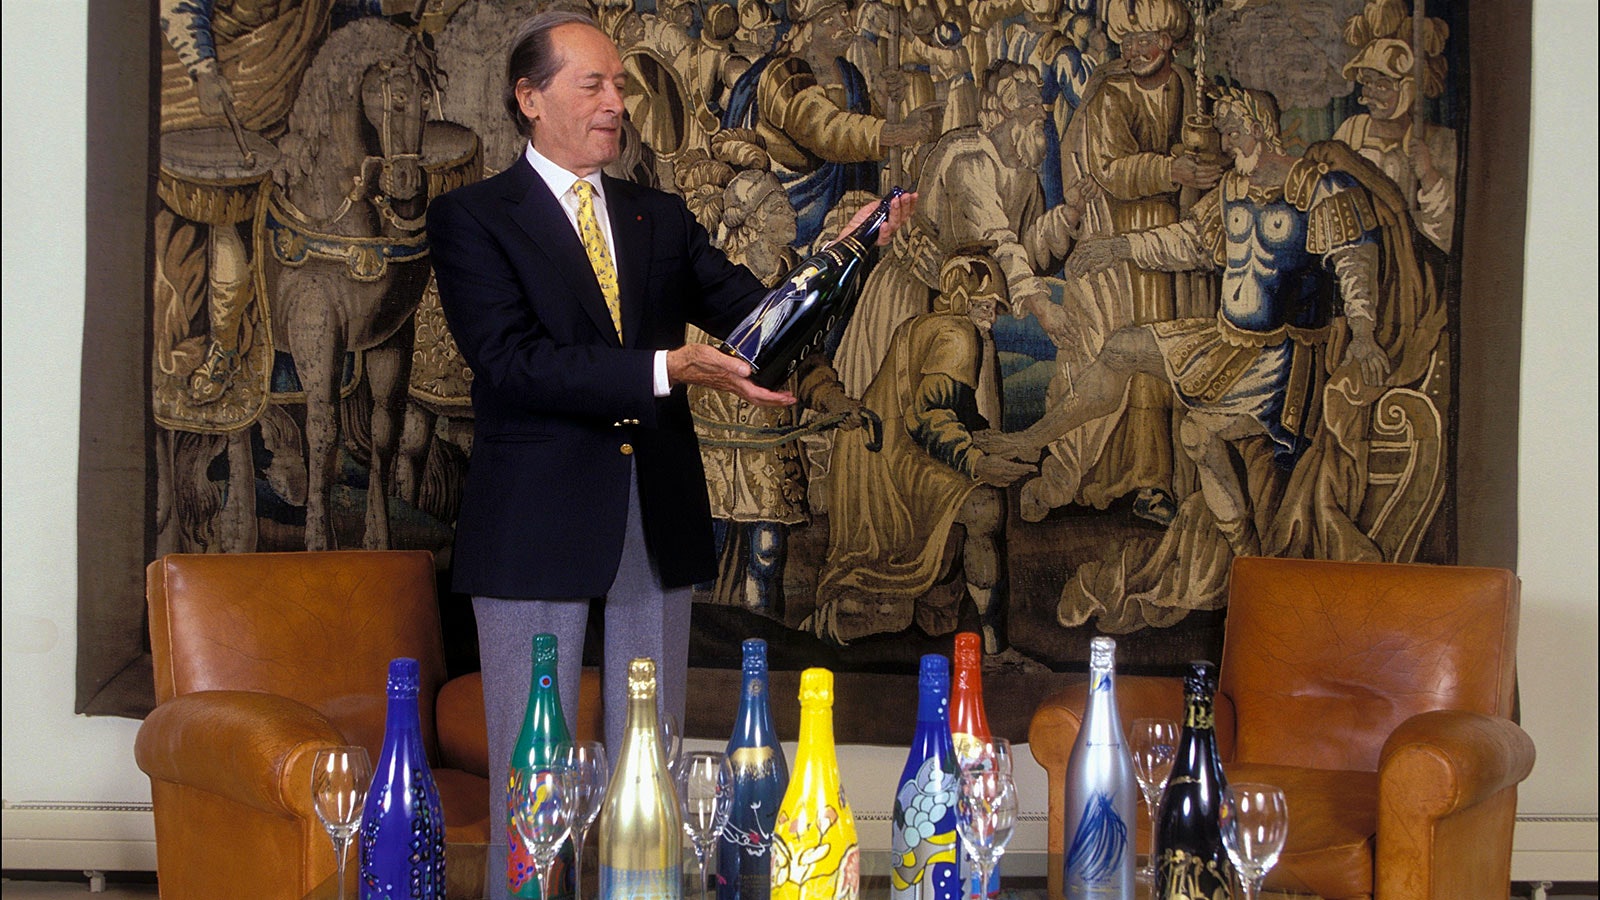  Claude Taittinger promoted great cuisine and modern art, while also selling his family's Champagne brand.